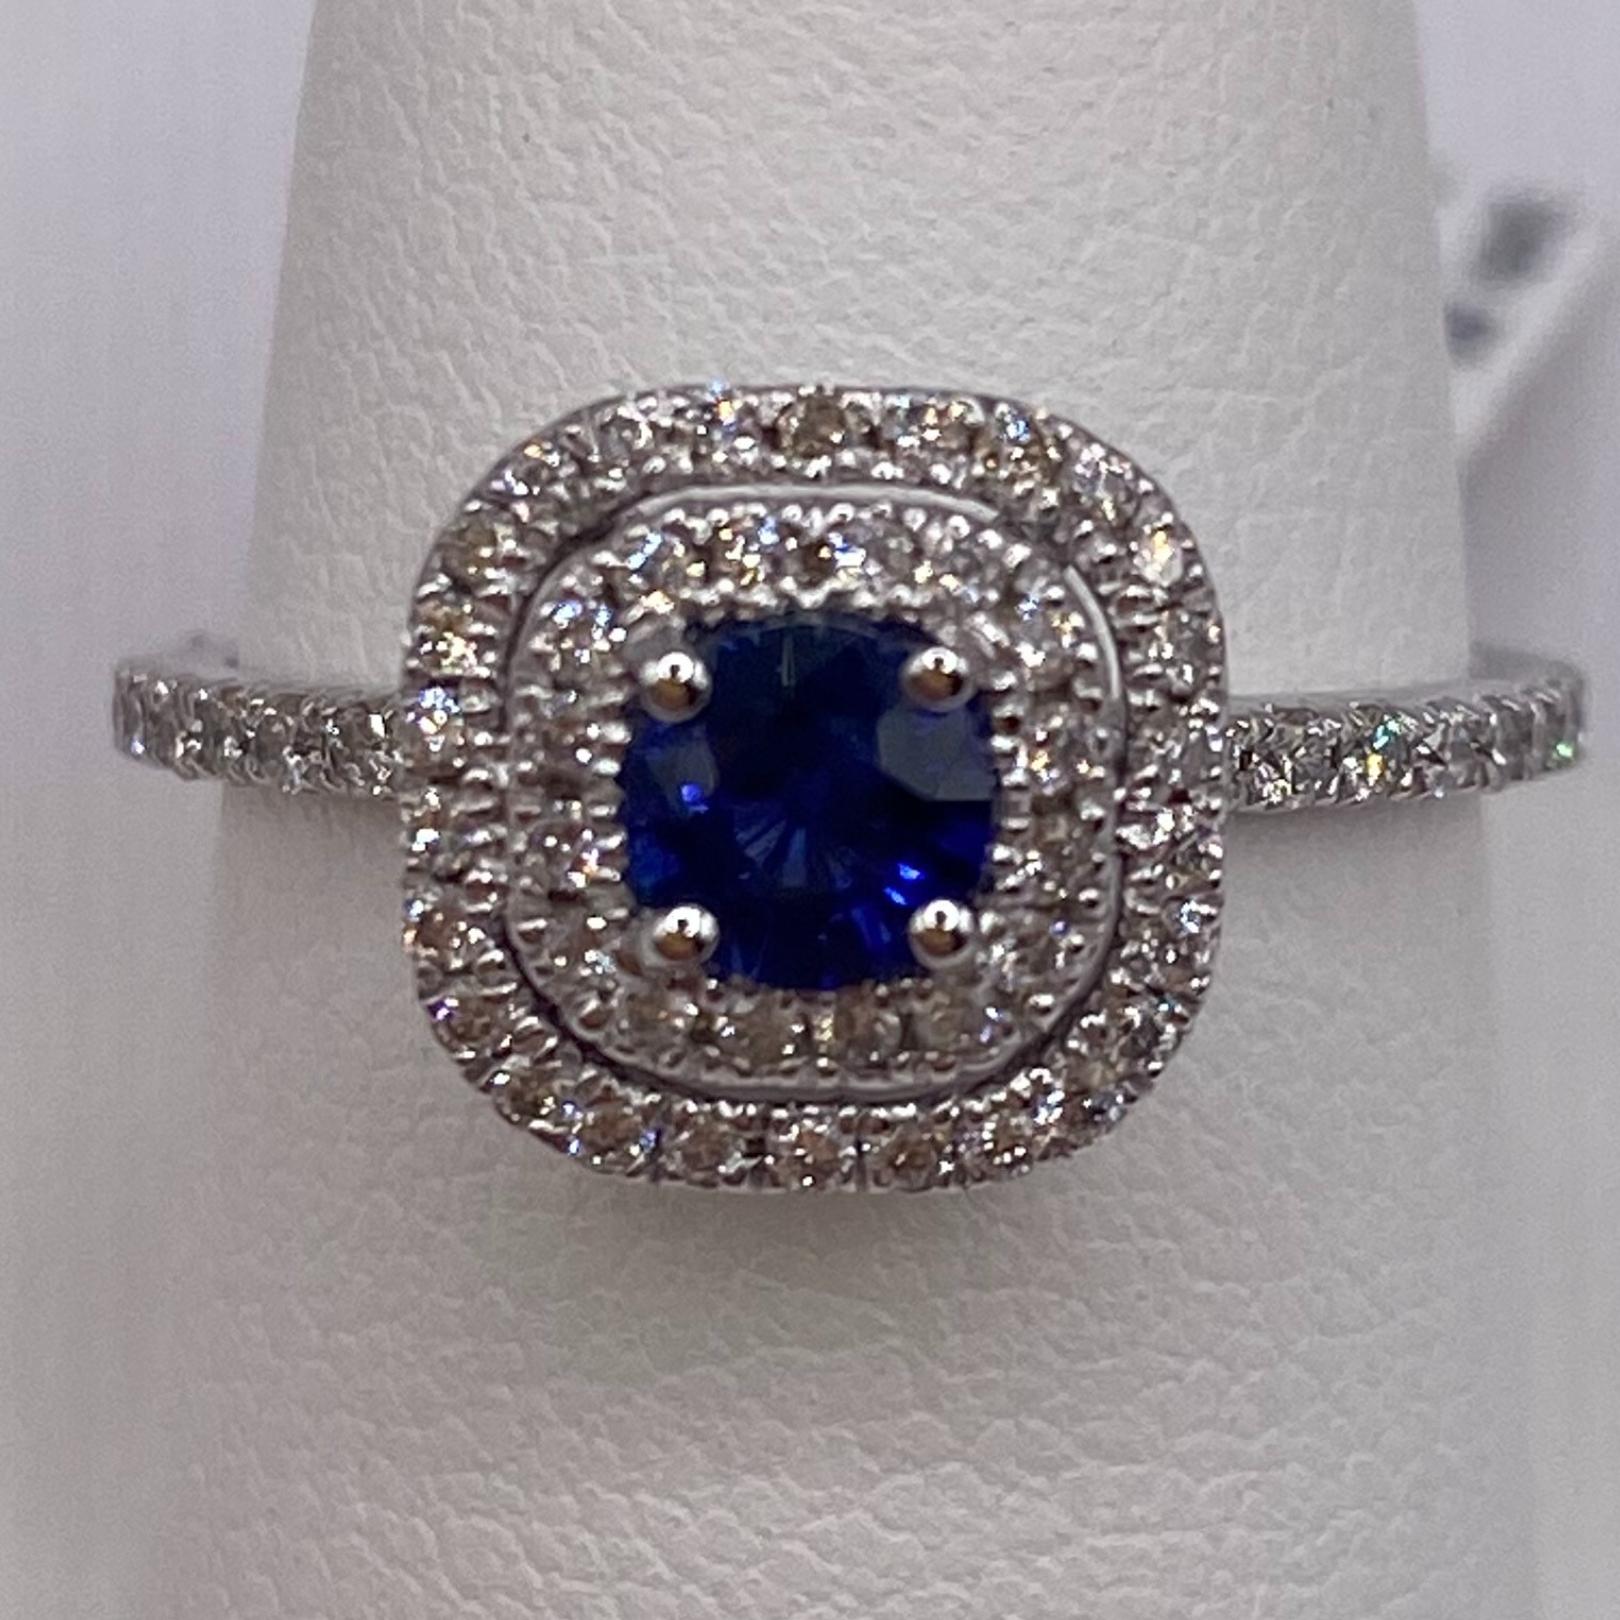 18KT White Gold
Finger Size: 6.5
Band Width: 1.5mm
(ring is size 6.5, but is sizable upon request)

Number of Round Sapphires: 1
Carat Weight: 0.46ctw
Stone Size: 4.4mm

Number of Round Diamonds: 0.70ctw
Diamond Weight: 0.46ctw